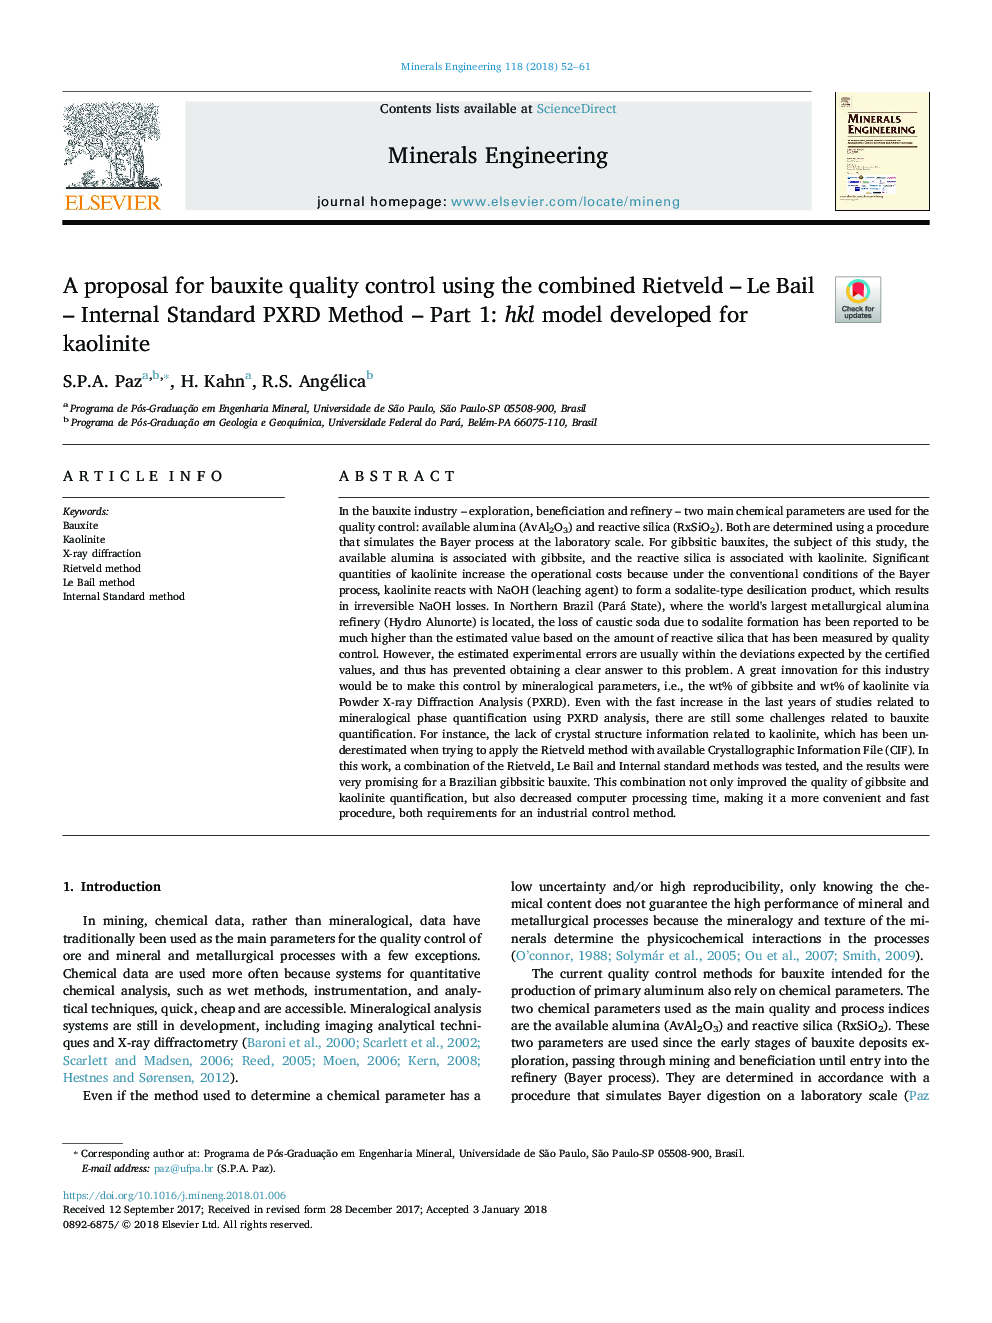 A proposal for bauxite quality control using the combined Rietveld - Le Bail - Internal Standard PXRD Method - Part 1: hkl model developed for kaolinite